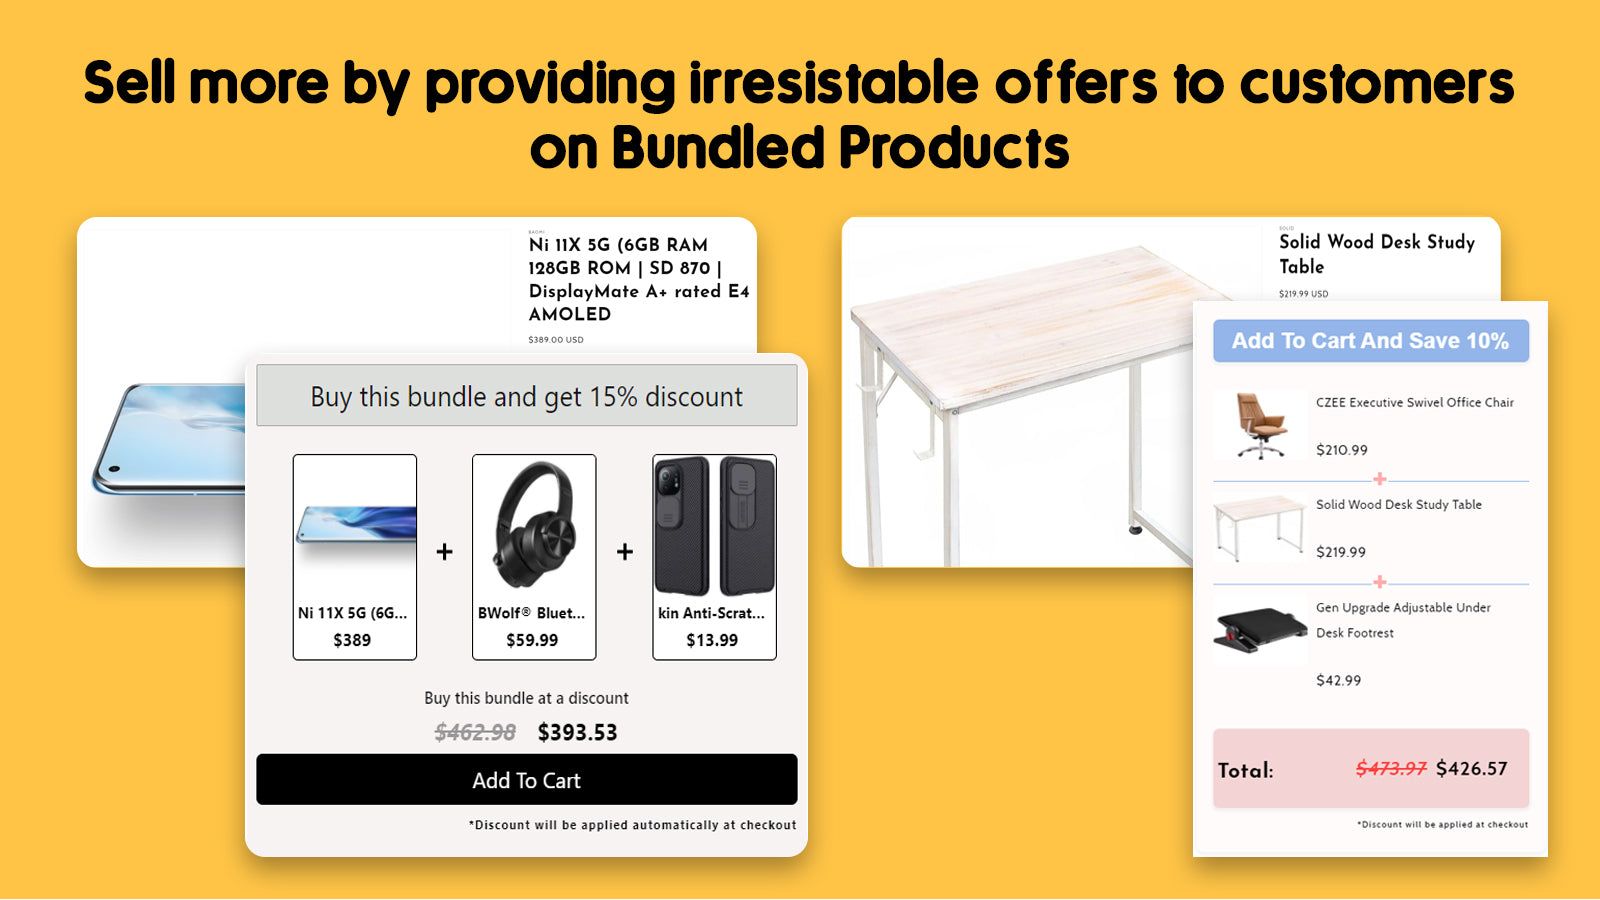 Bundle upsell products together